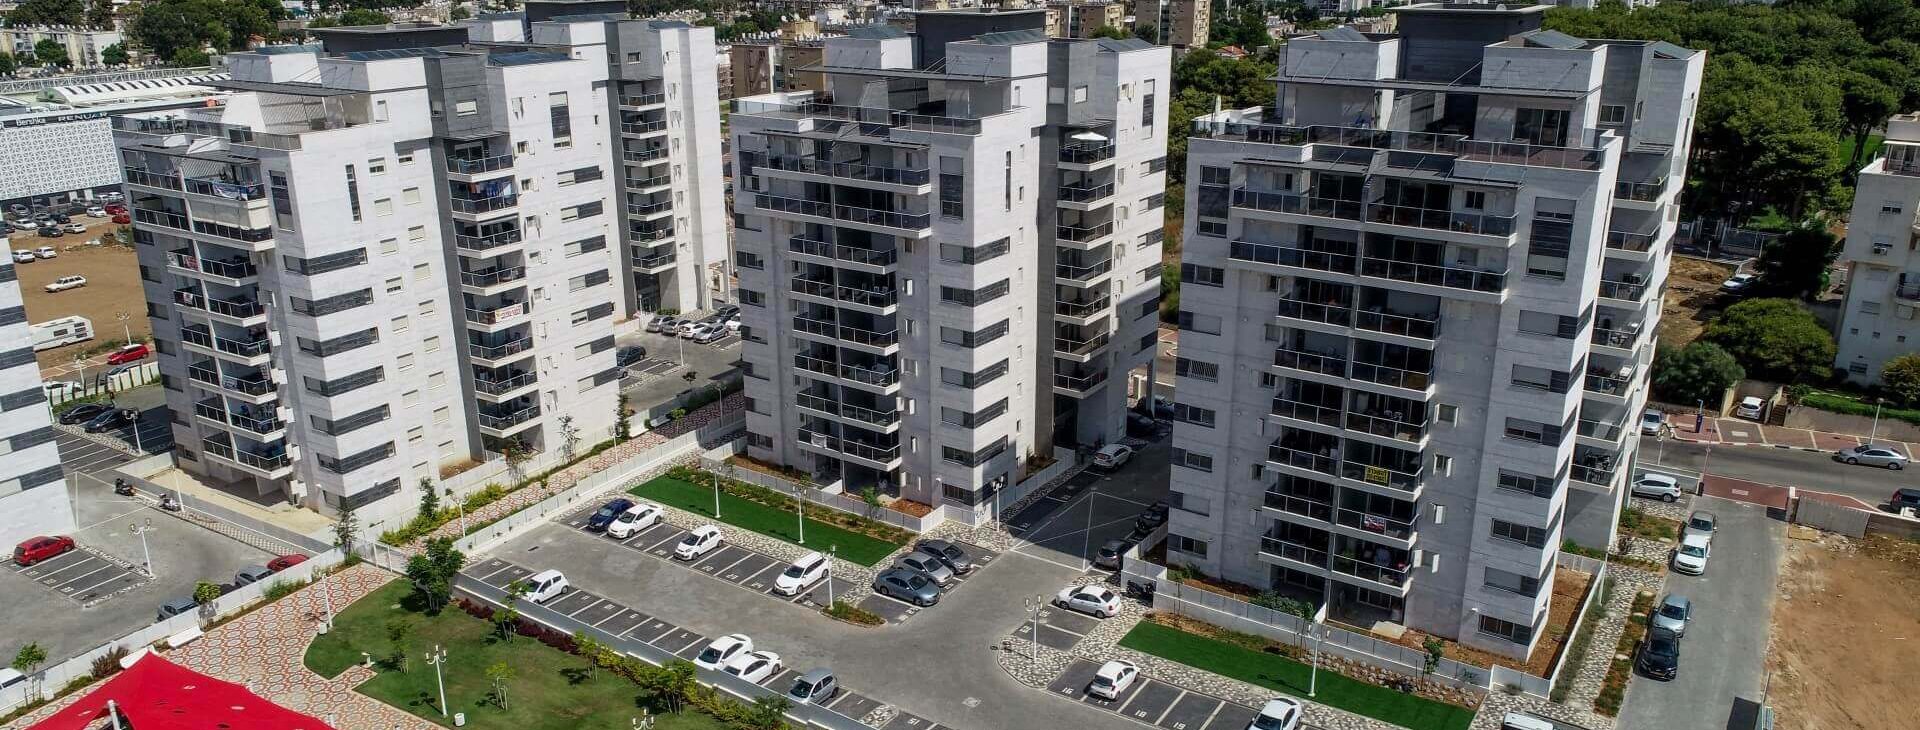 Photograph of buildings in the UNIK S project in Nahariya